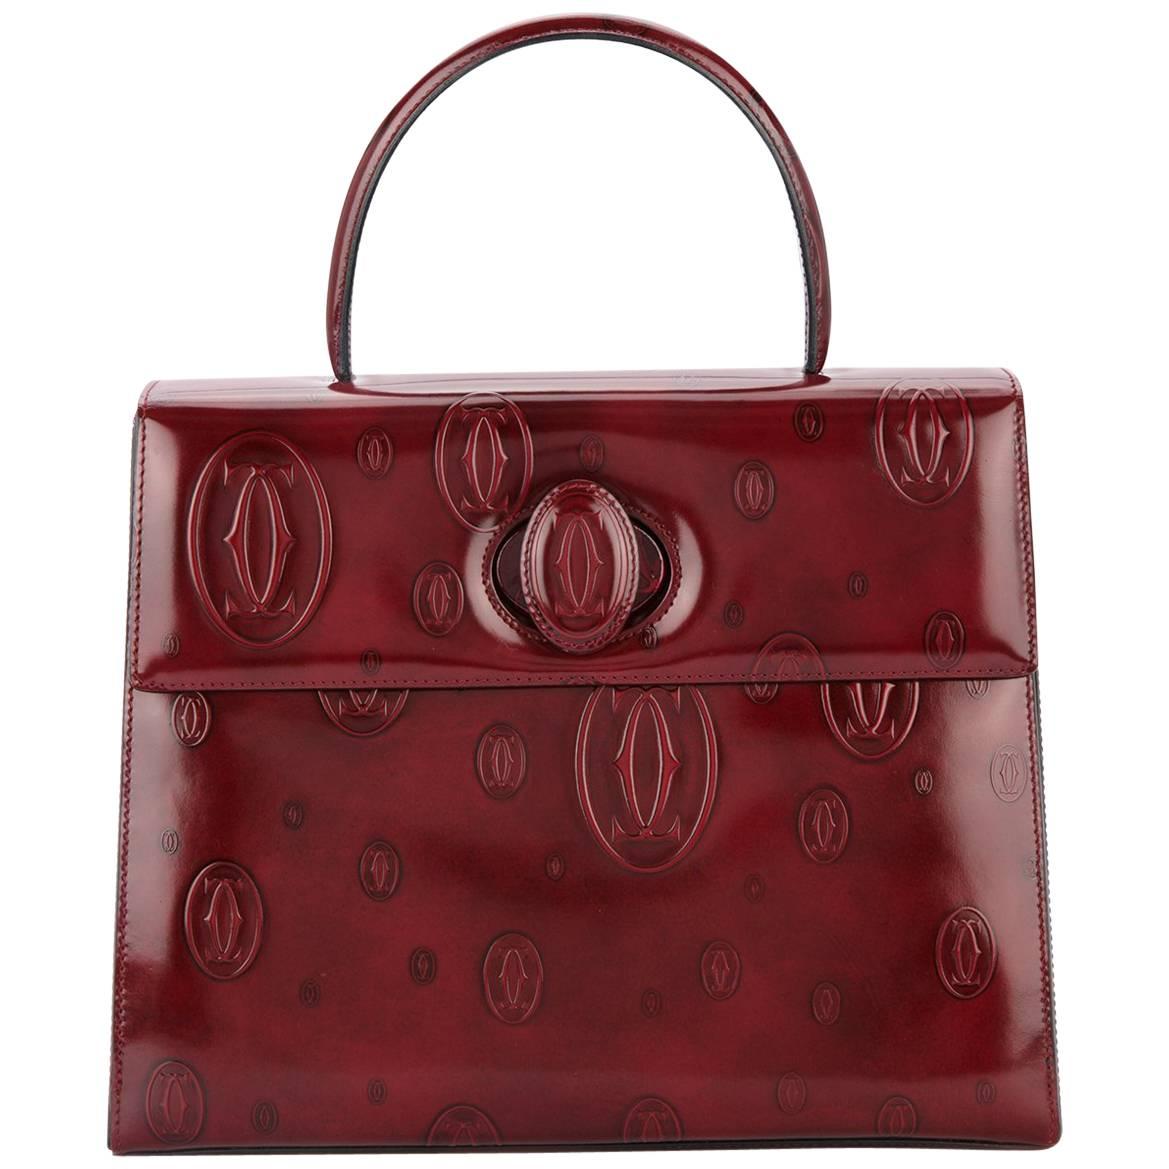 Cartier Burgundy Patent Leather Top Handle Satchel Kelly Style Evening Flap Bag